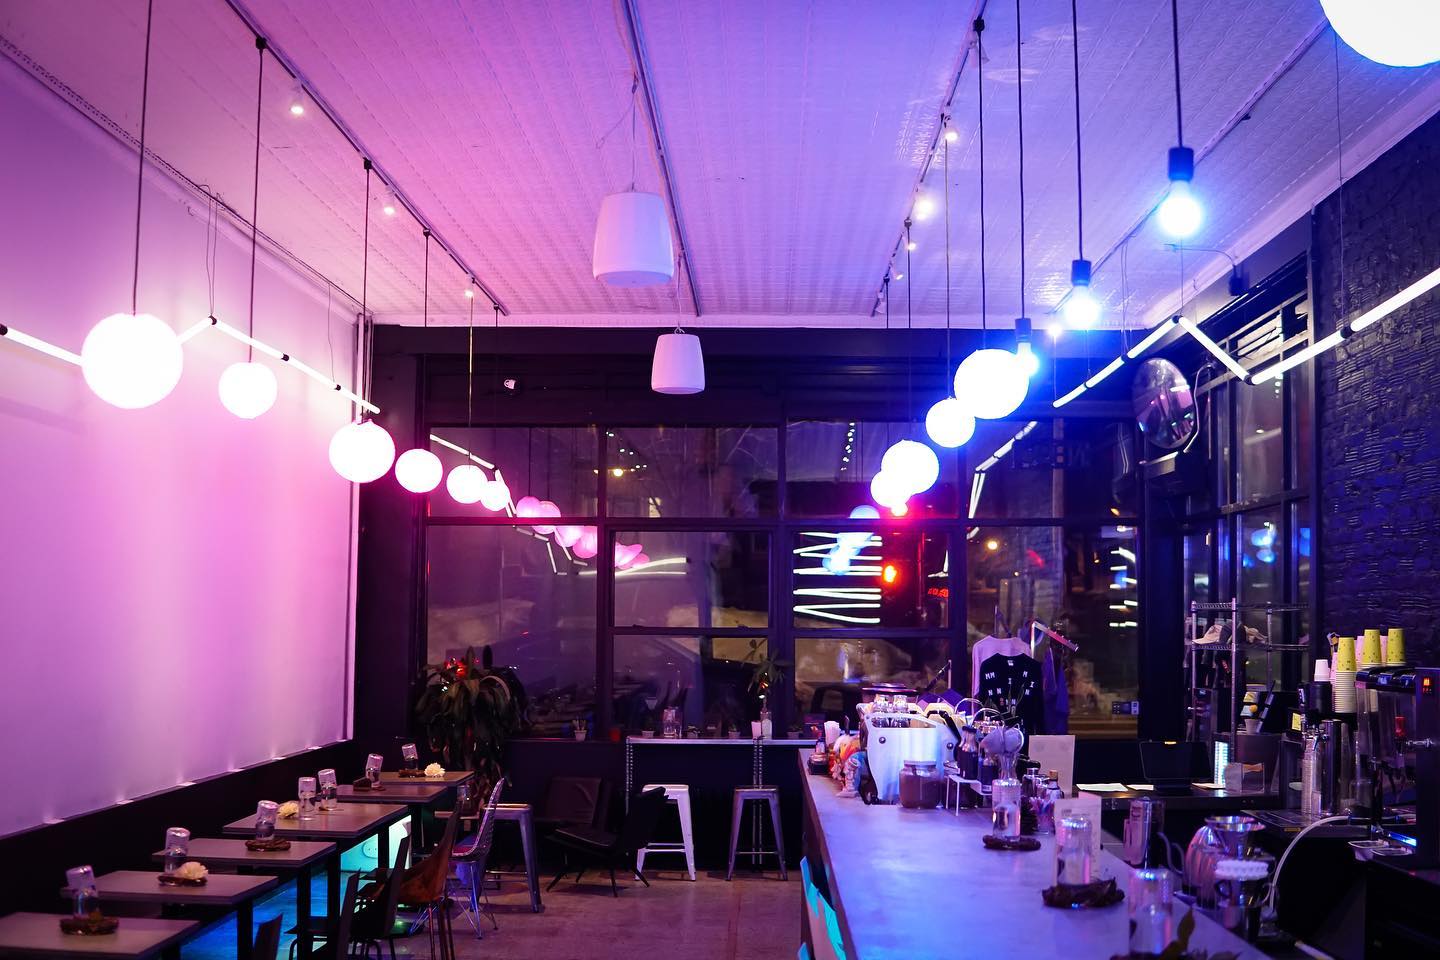 the interior of misfit's coffee shop, which is lit by purple and blue bulbs